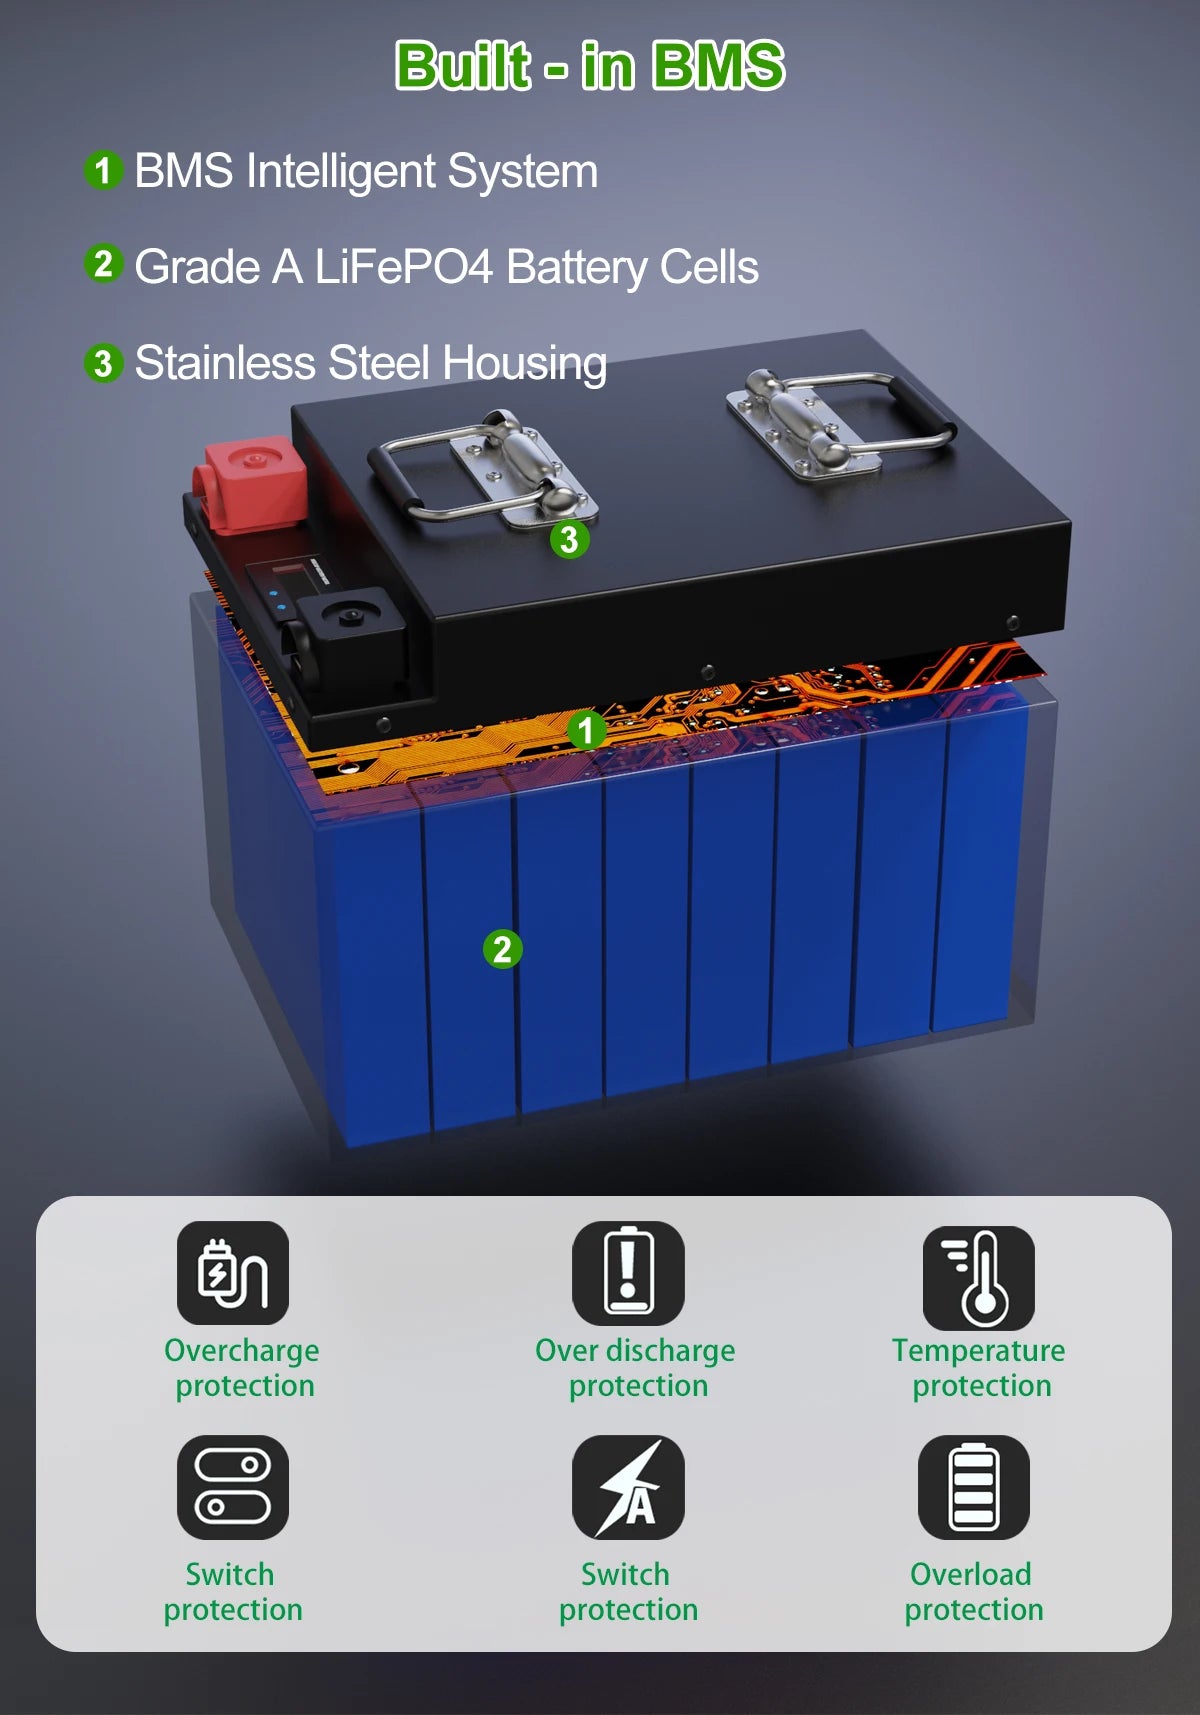 LiFePO4 24V 200AH Battery, High-performance battery with built-in intelligence and advanced safety features.